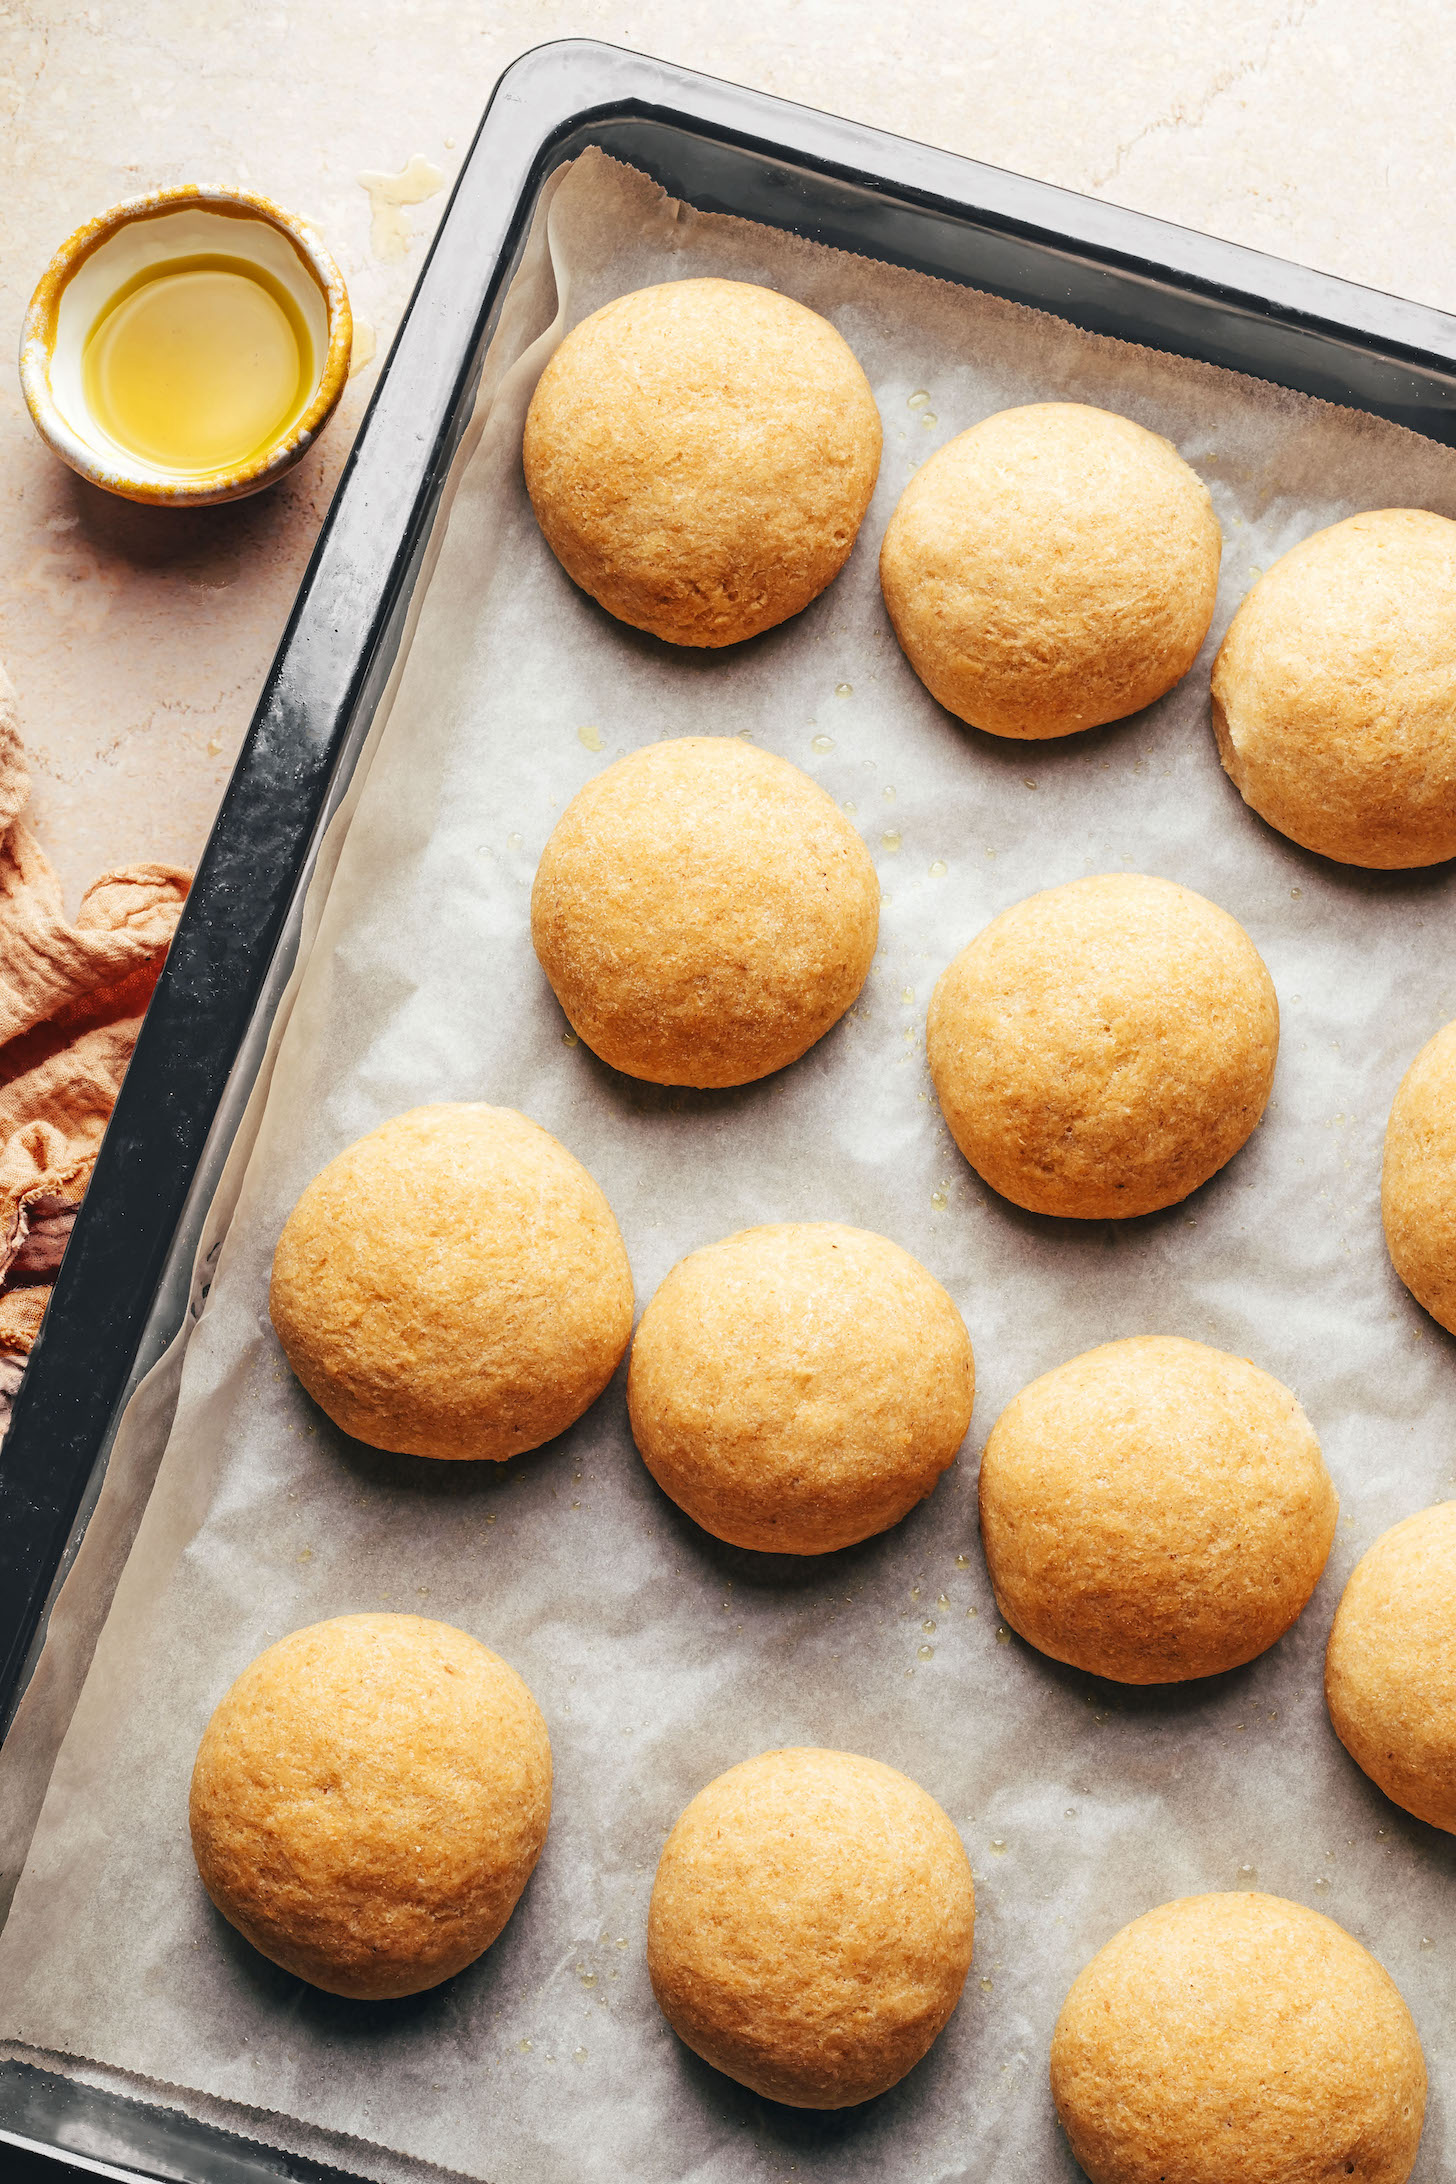 Freshly baked gluten-free vegan dinner rolls on a baking tray lined with baking paper